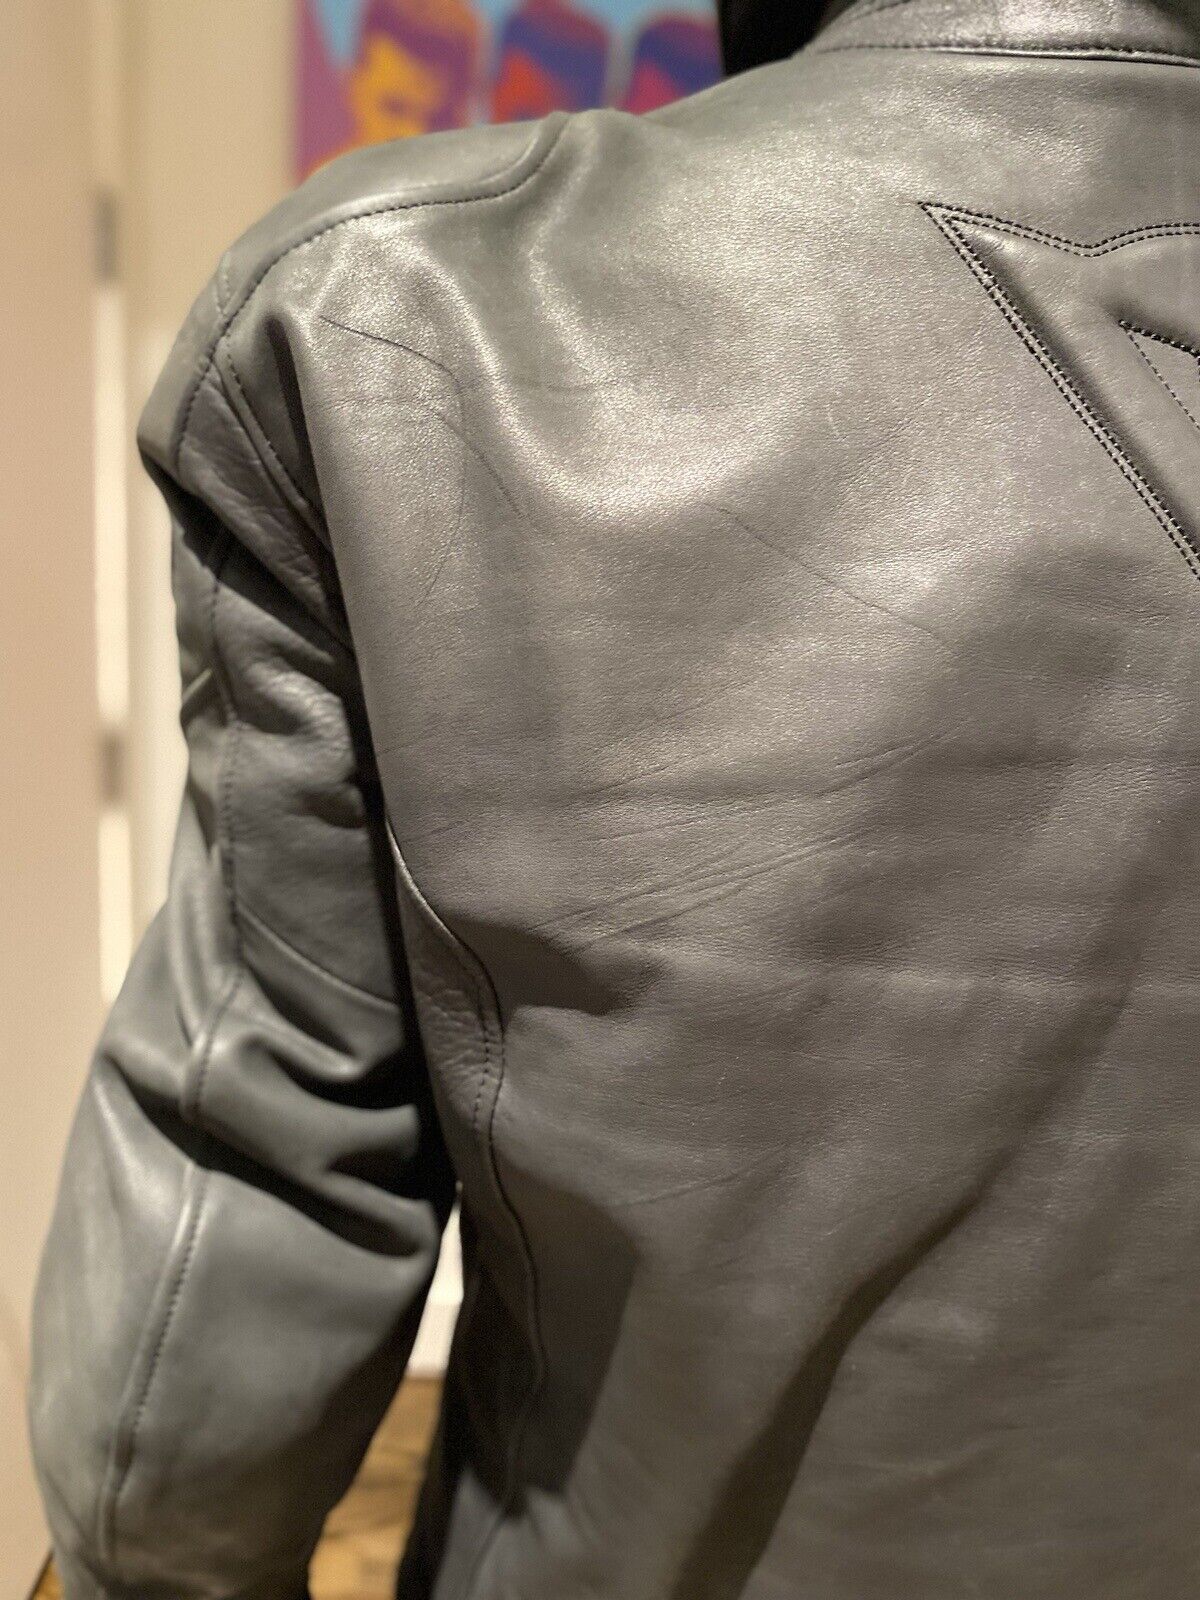 DAINESE 🏍️ FIGHTER Perforated Leather Jacket 54 $699